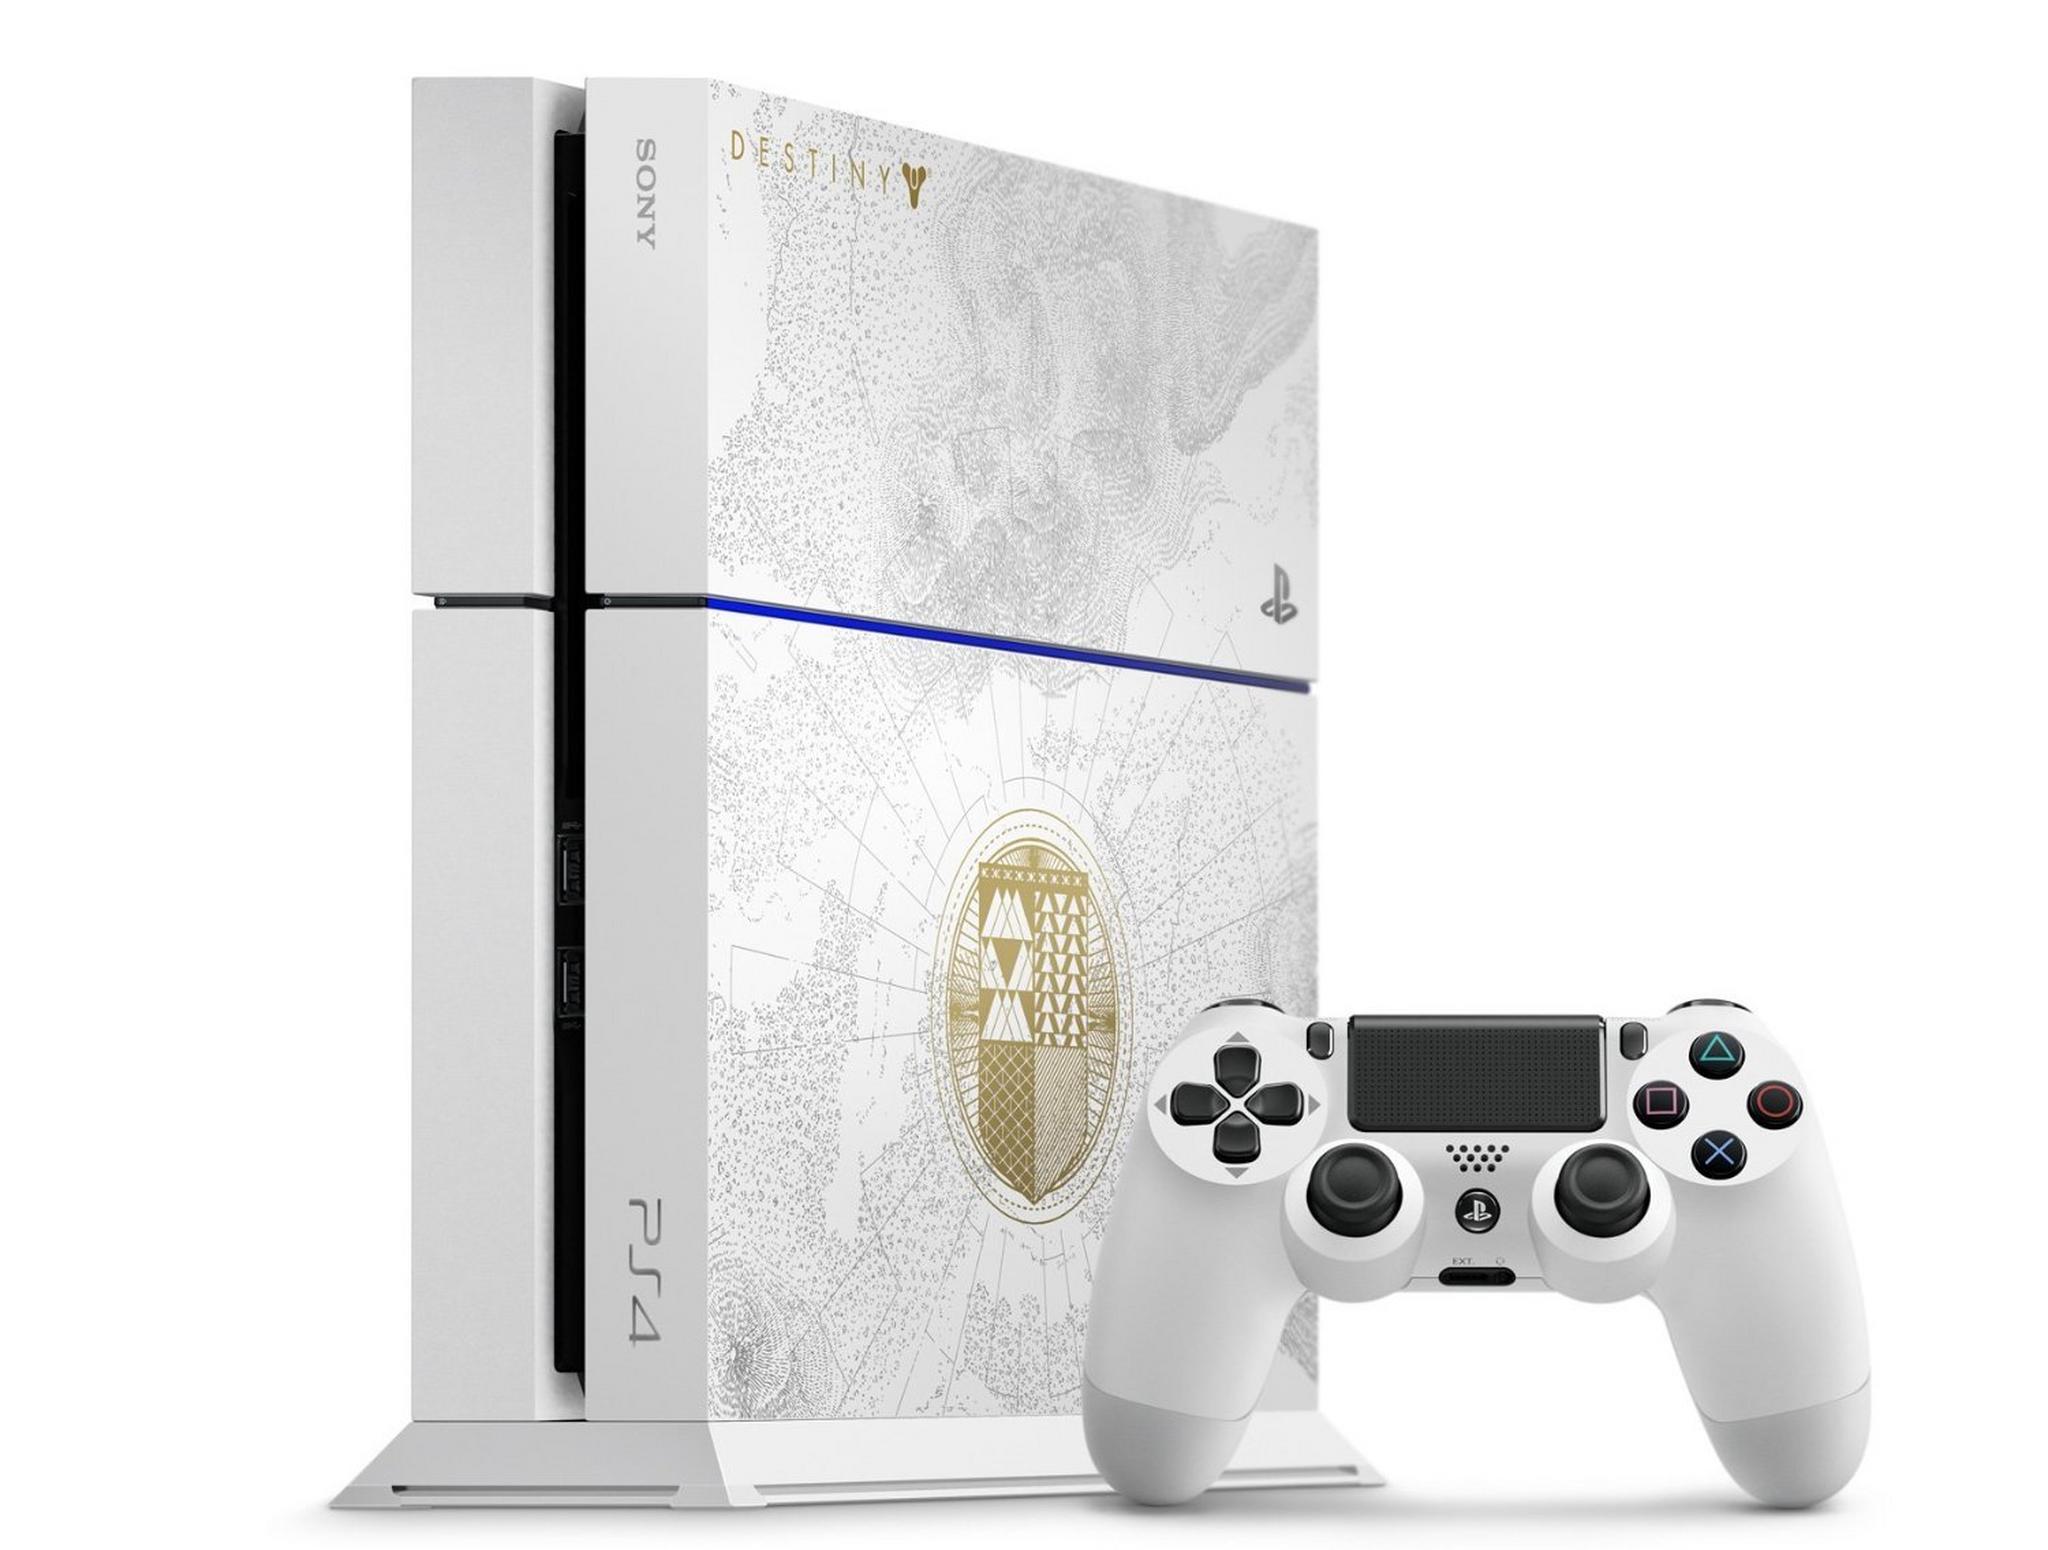 Sony PlayStation 4 500GB Limited Edition + 1 Controller + Destiny: The Taken King Game (Legendary Edition)